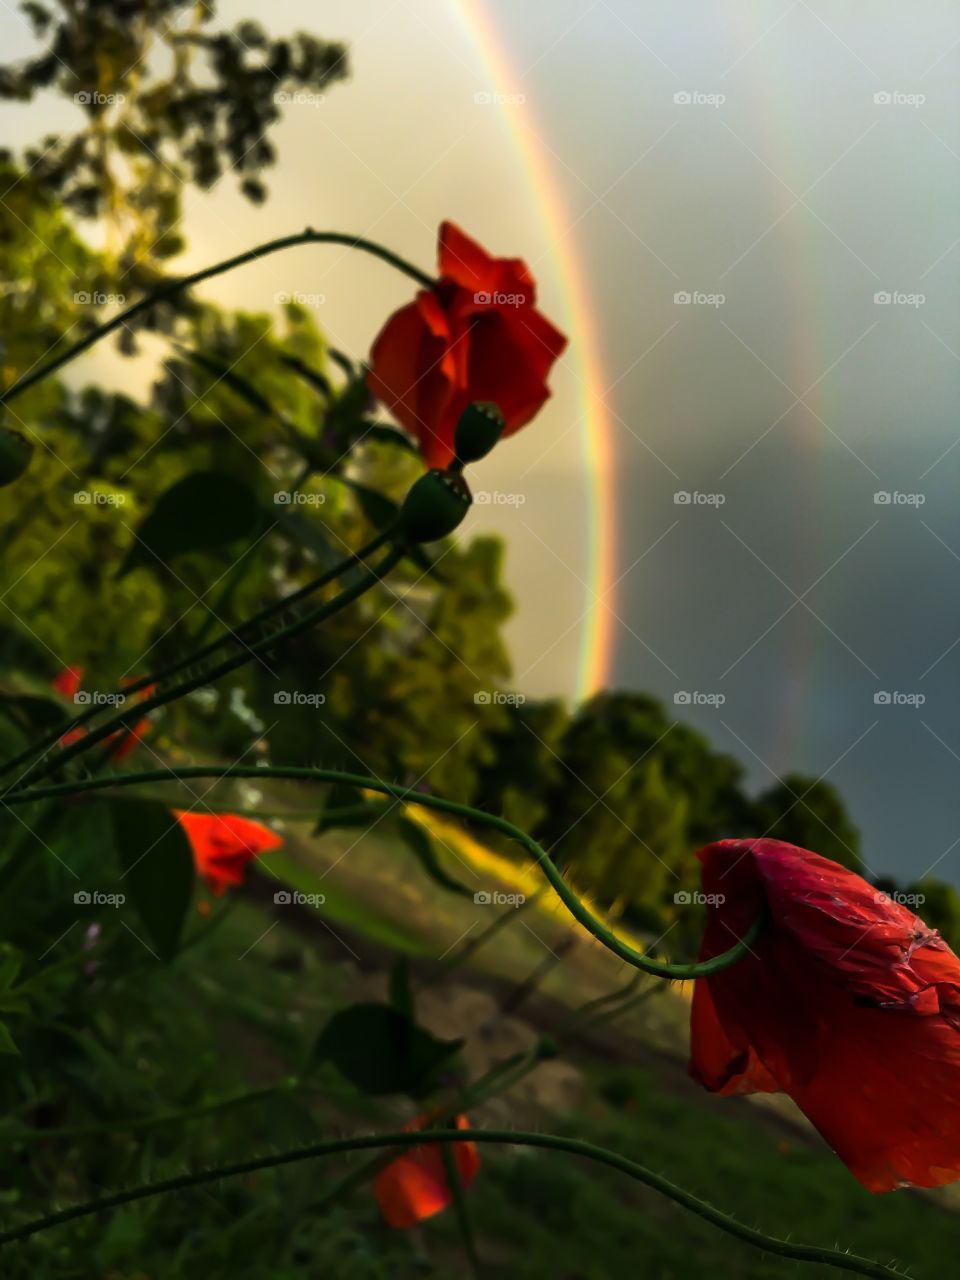 Double Flower Double Ranbow. Taken in southern Sweden by Emil Gedenryd on the 29th of July 2015 